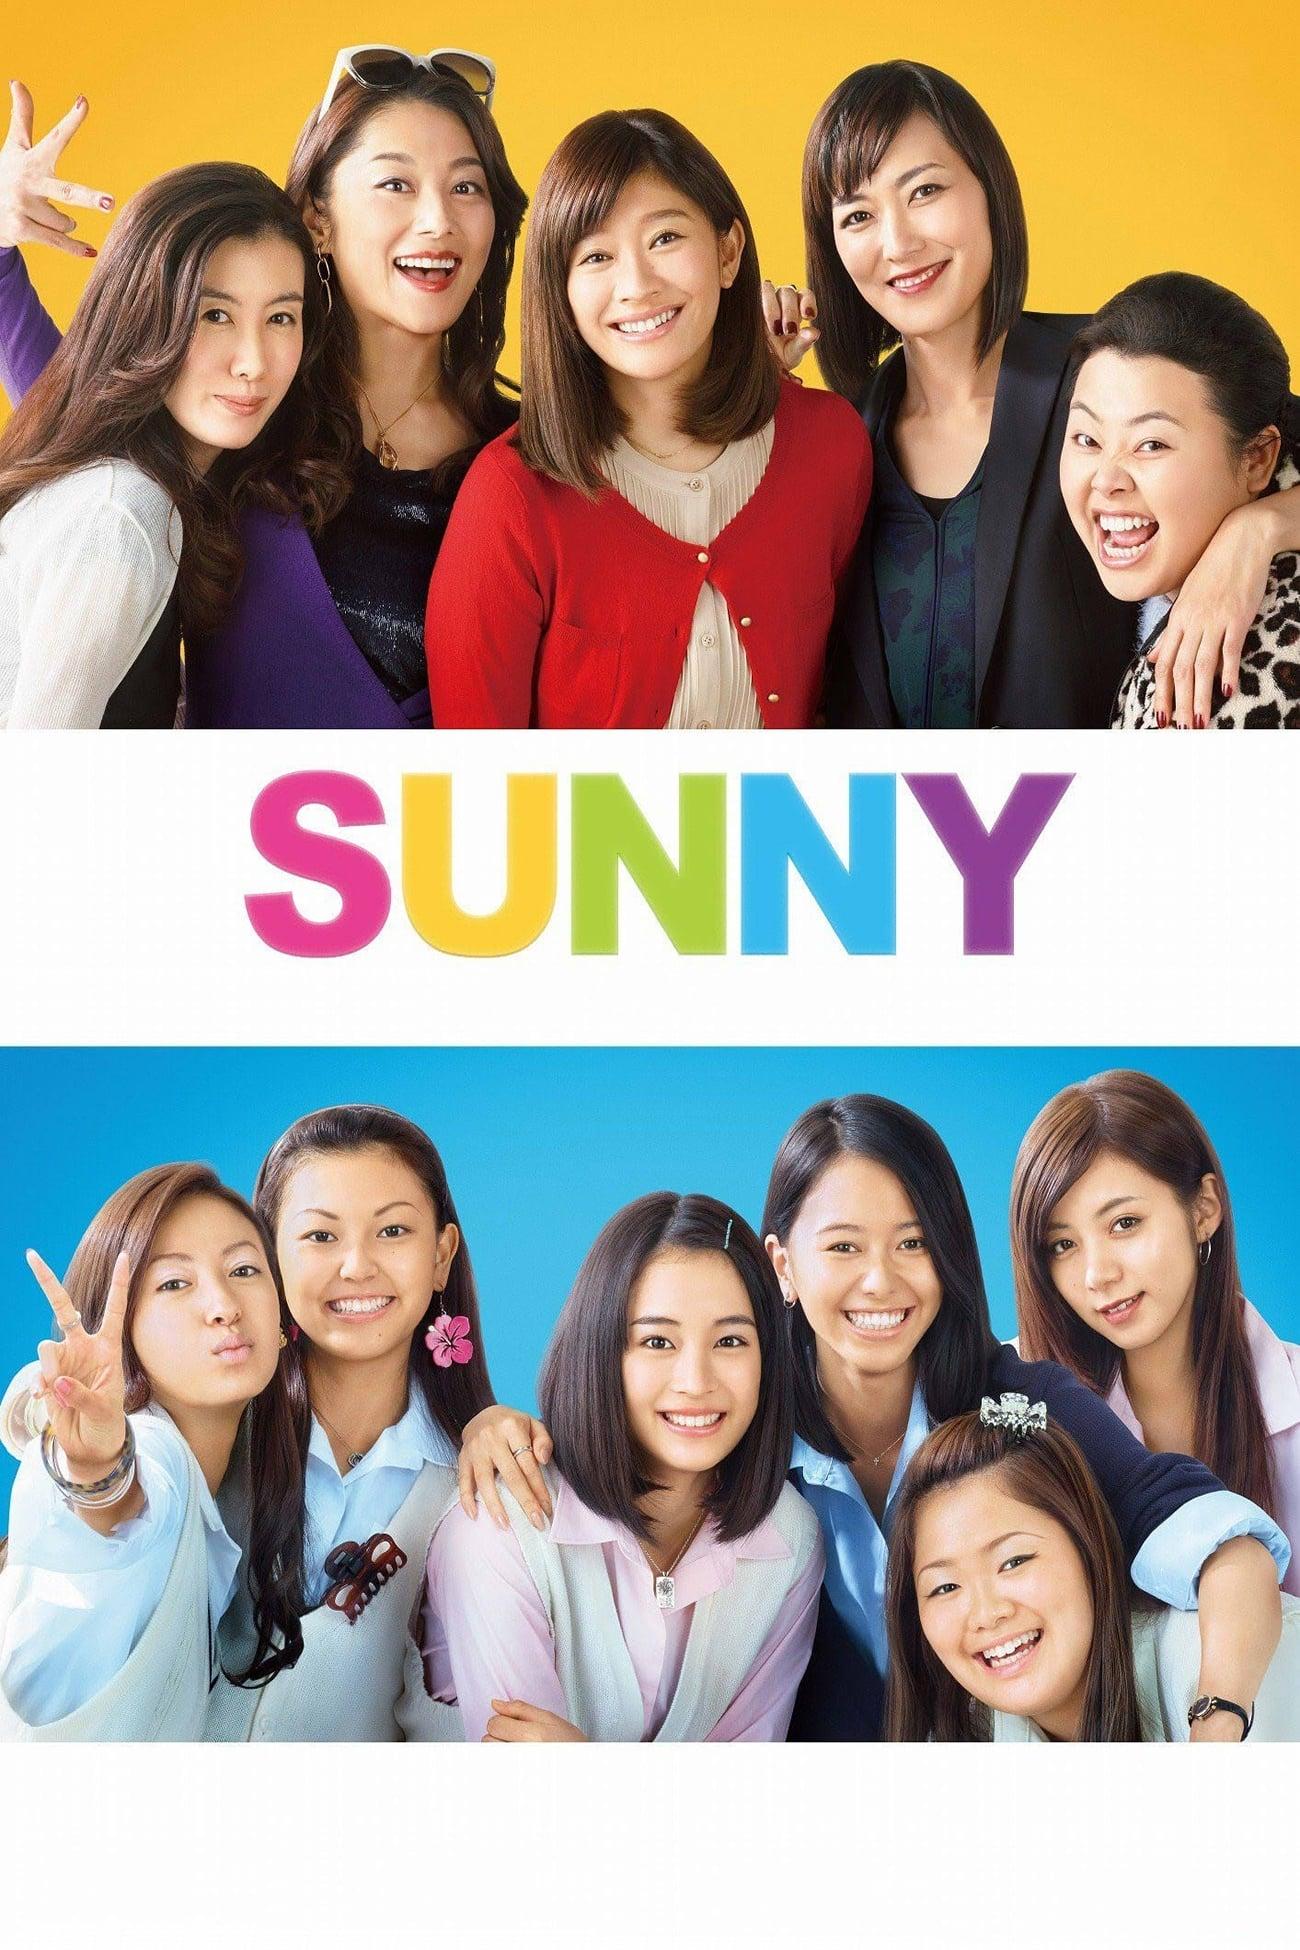 Sunny: Our Hearts Beat Together poster